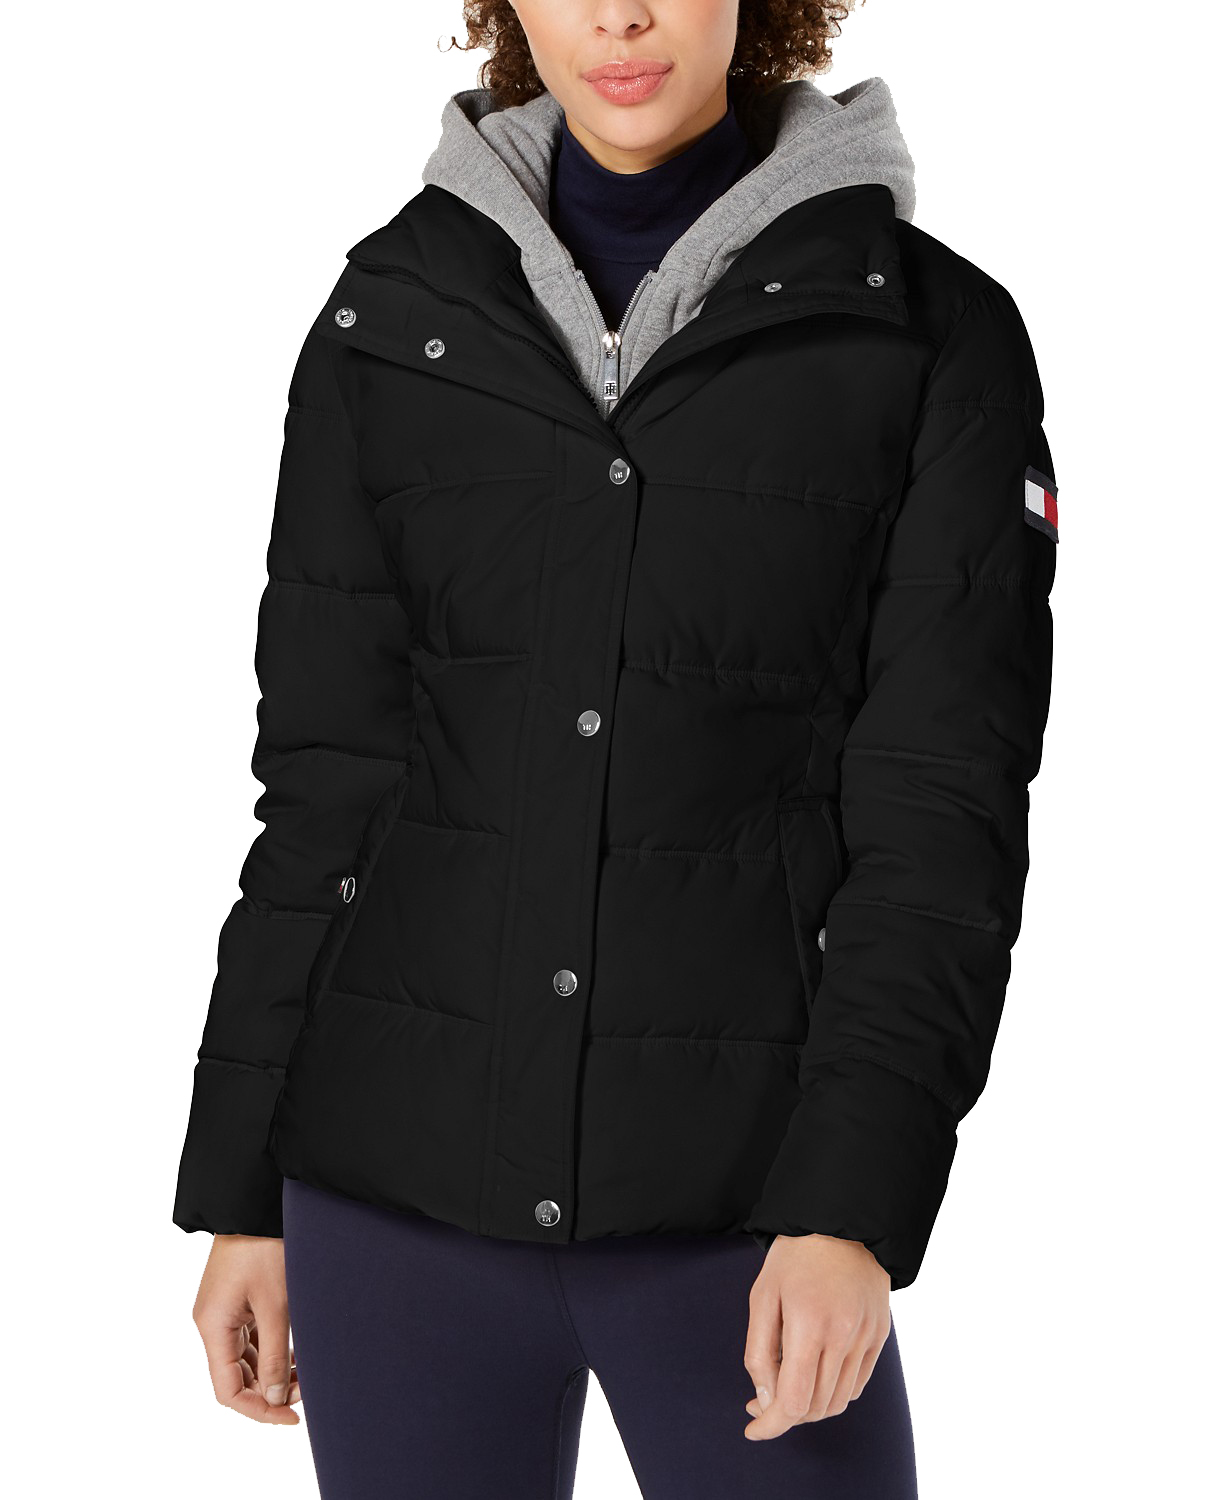 www.couturepoint.com-tommy-hilfiger-womens-black-hooded-puffer-coat